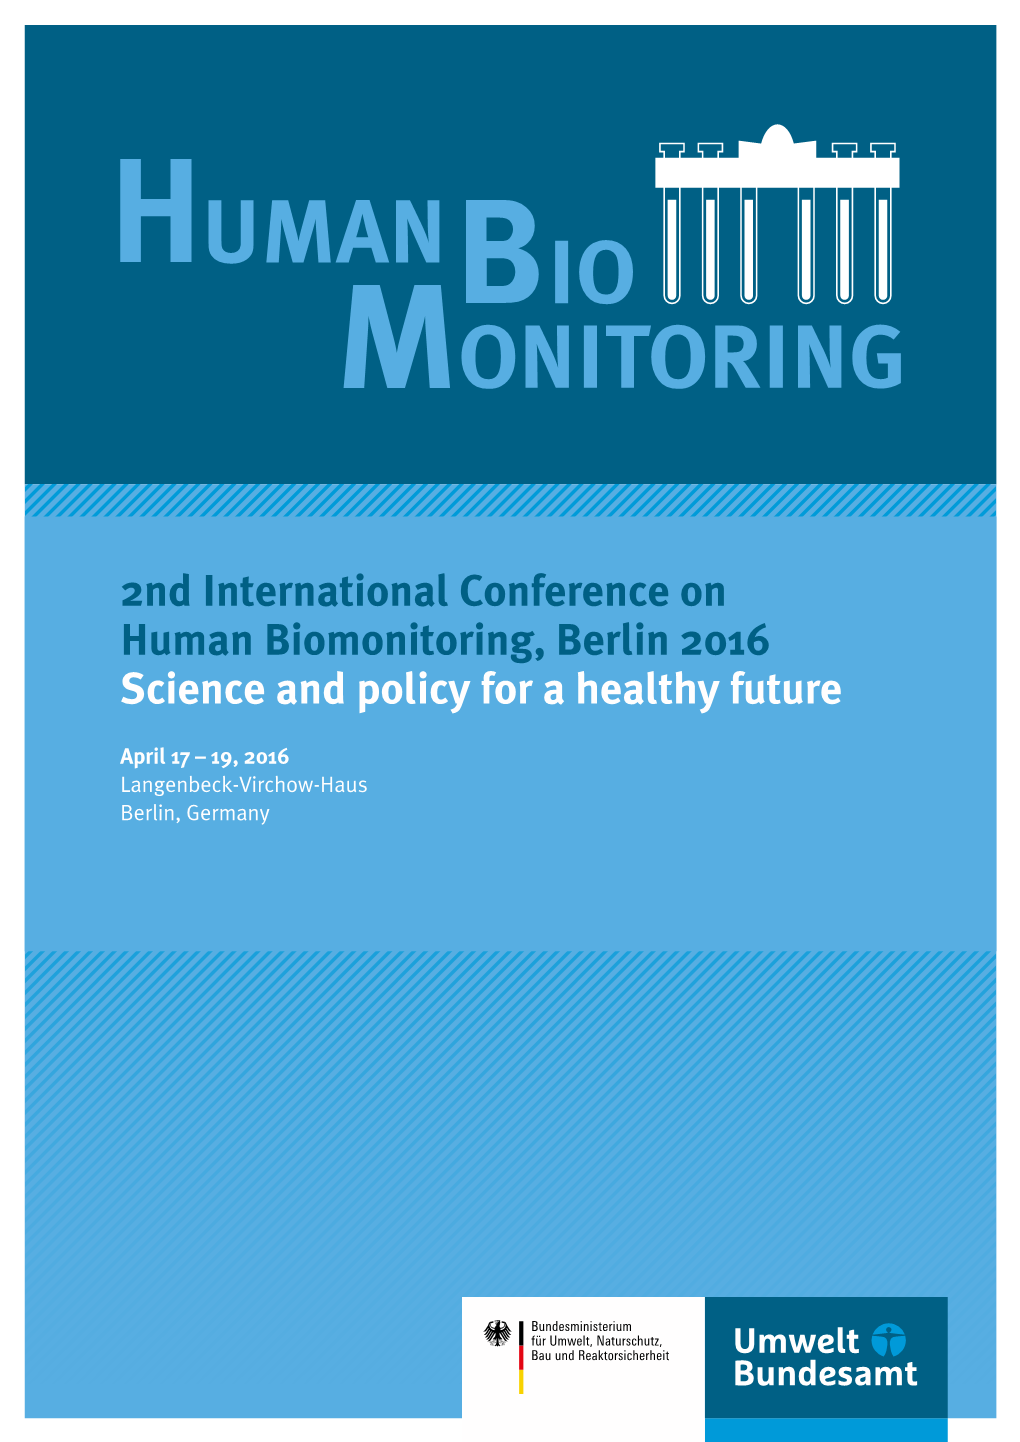 2Nd International Conference on Human Biomonitoring, Berlin 2016 Science and Policy for a Healthy Future